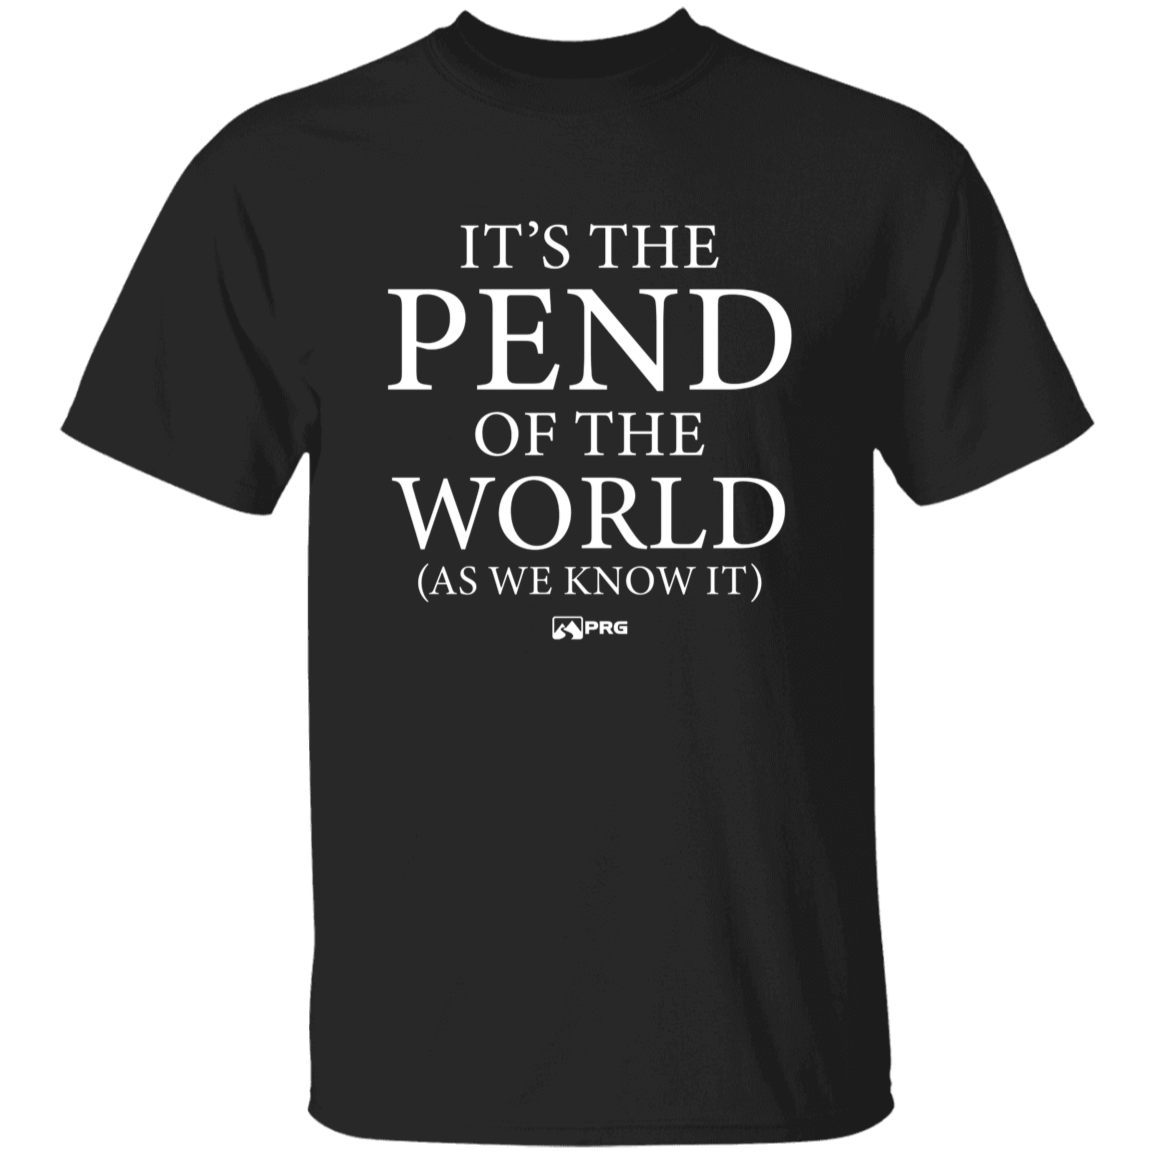 Pend of the World - Youth Shirt